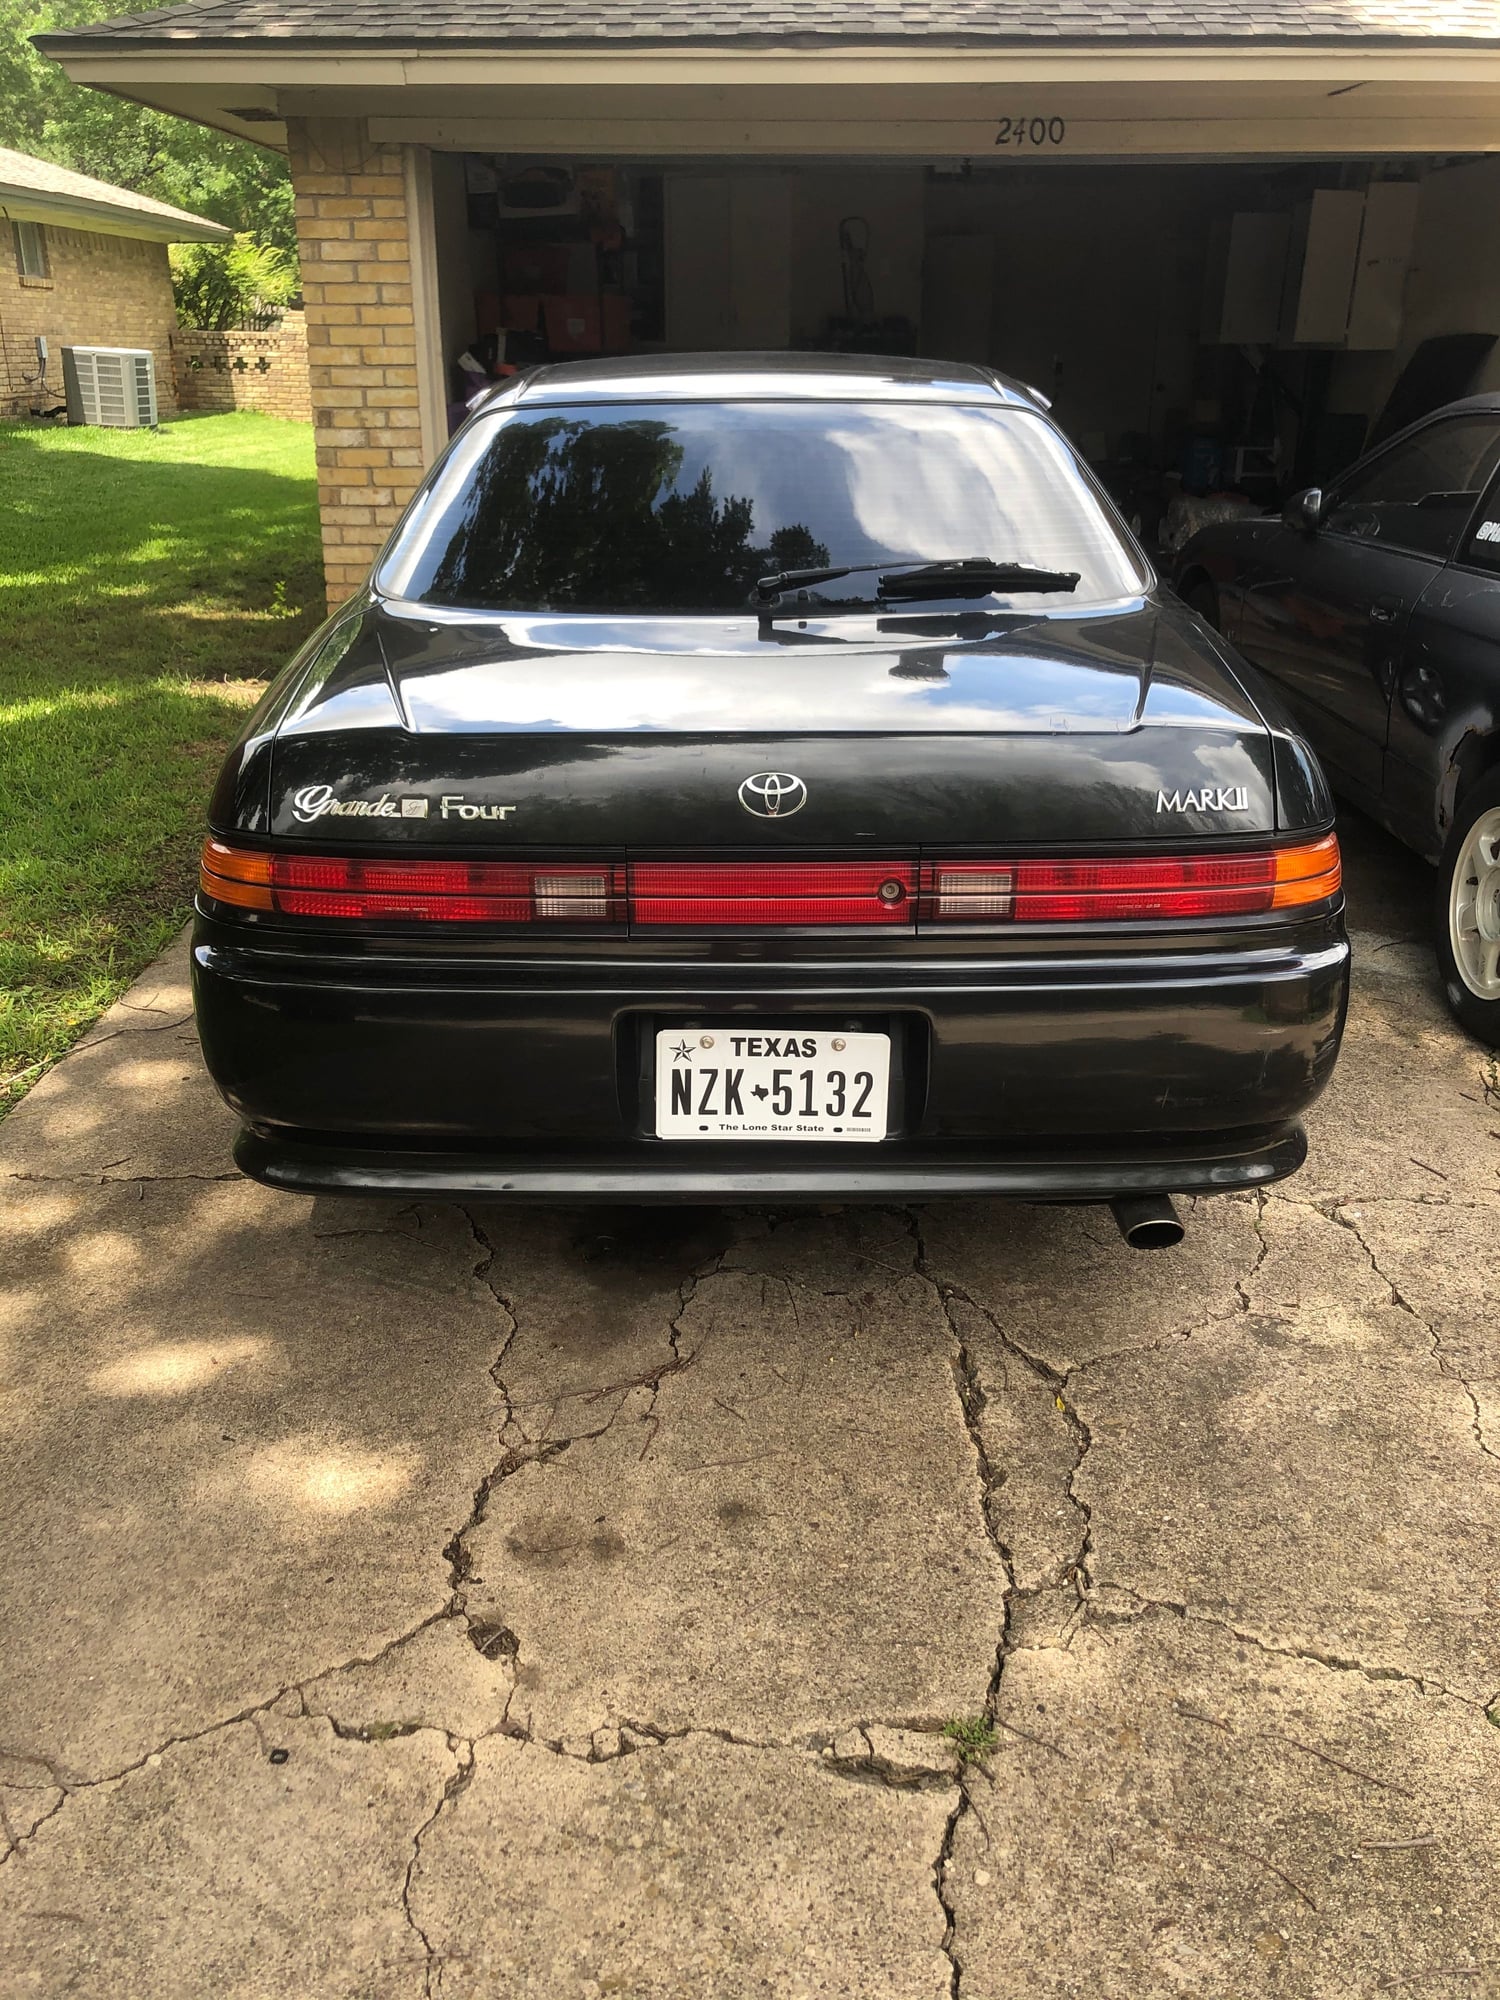 1992 Nissan 240SX - Looking To Trade - Used - VIN 01010101010101010 - 69,000 Miles - 6 cyl - 2WD - Manual - Coupe - Gray - Plano, TX 75075, United States